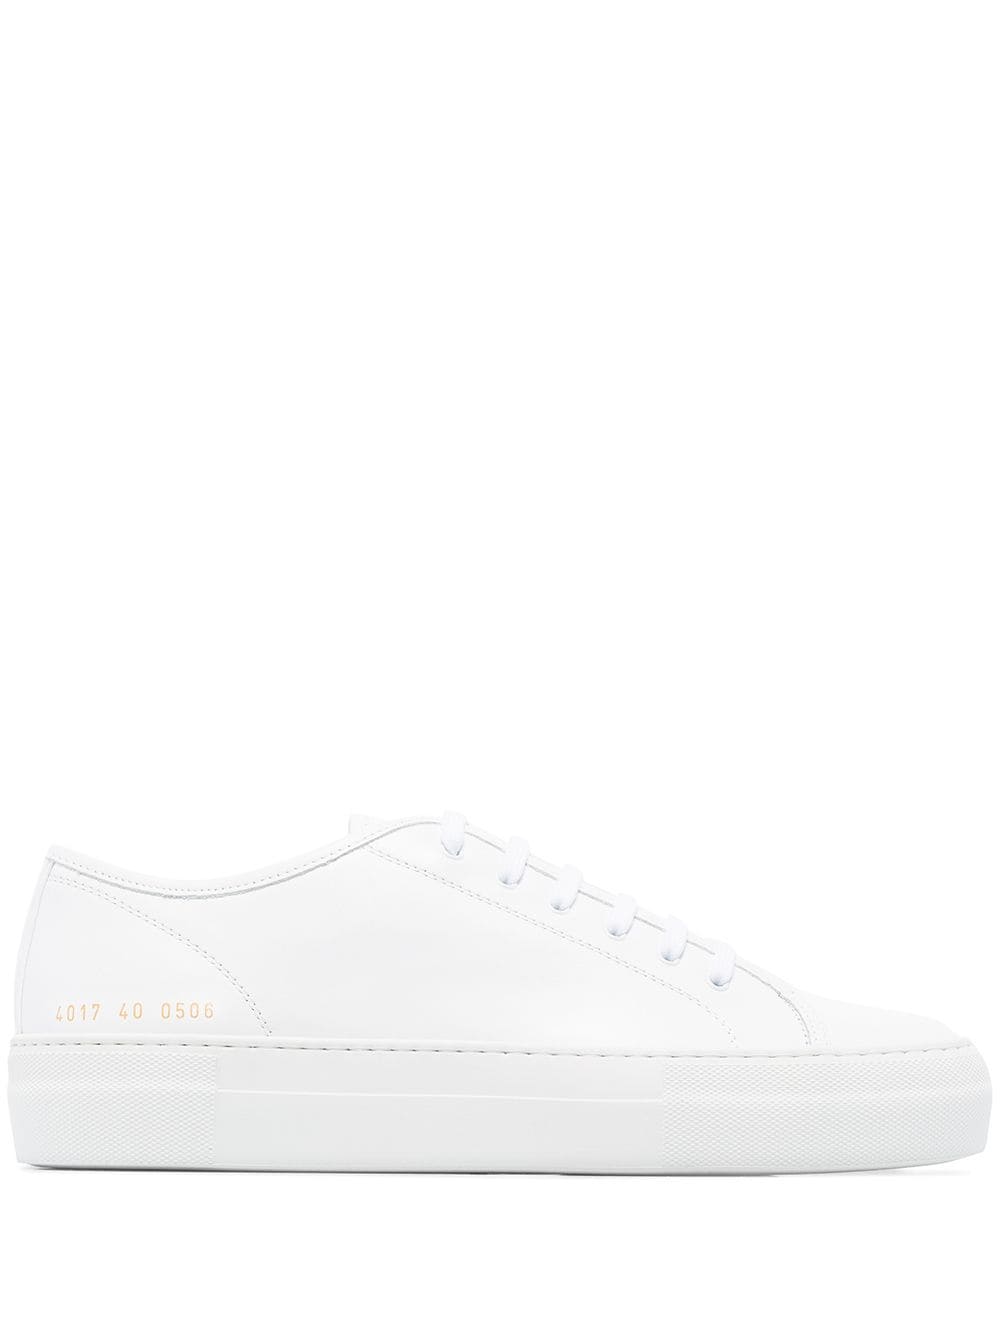 common projects tournament low super sneakers